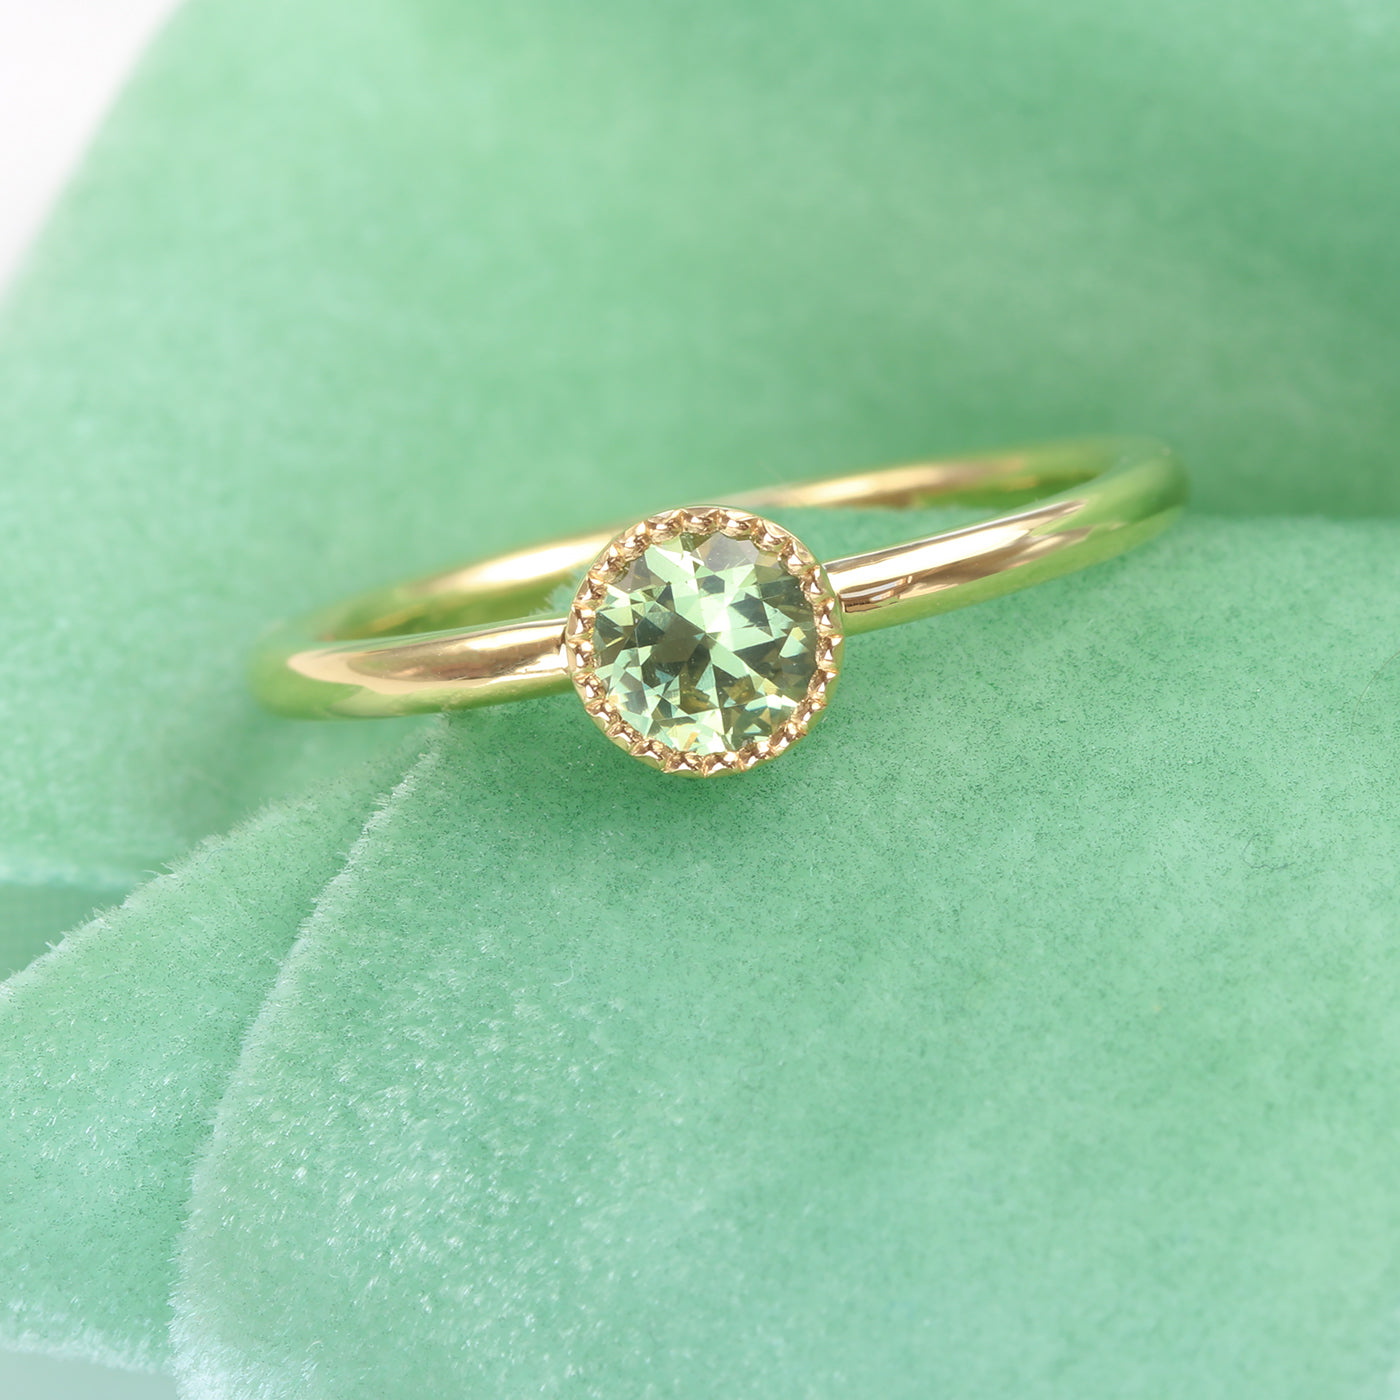 Petite Green Sapphire Solitaire Engagement Ring, 18ct Gold (Size J 1/2, Resize H – K)